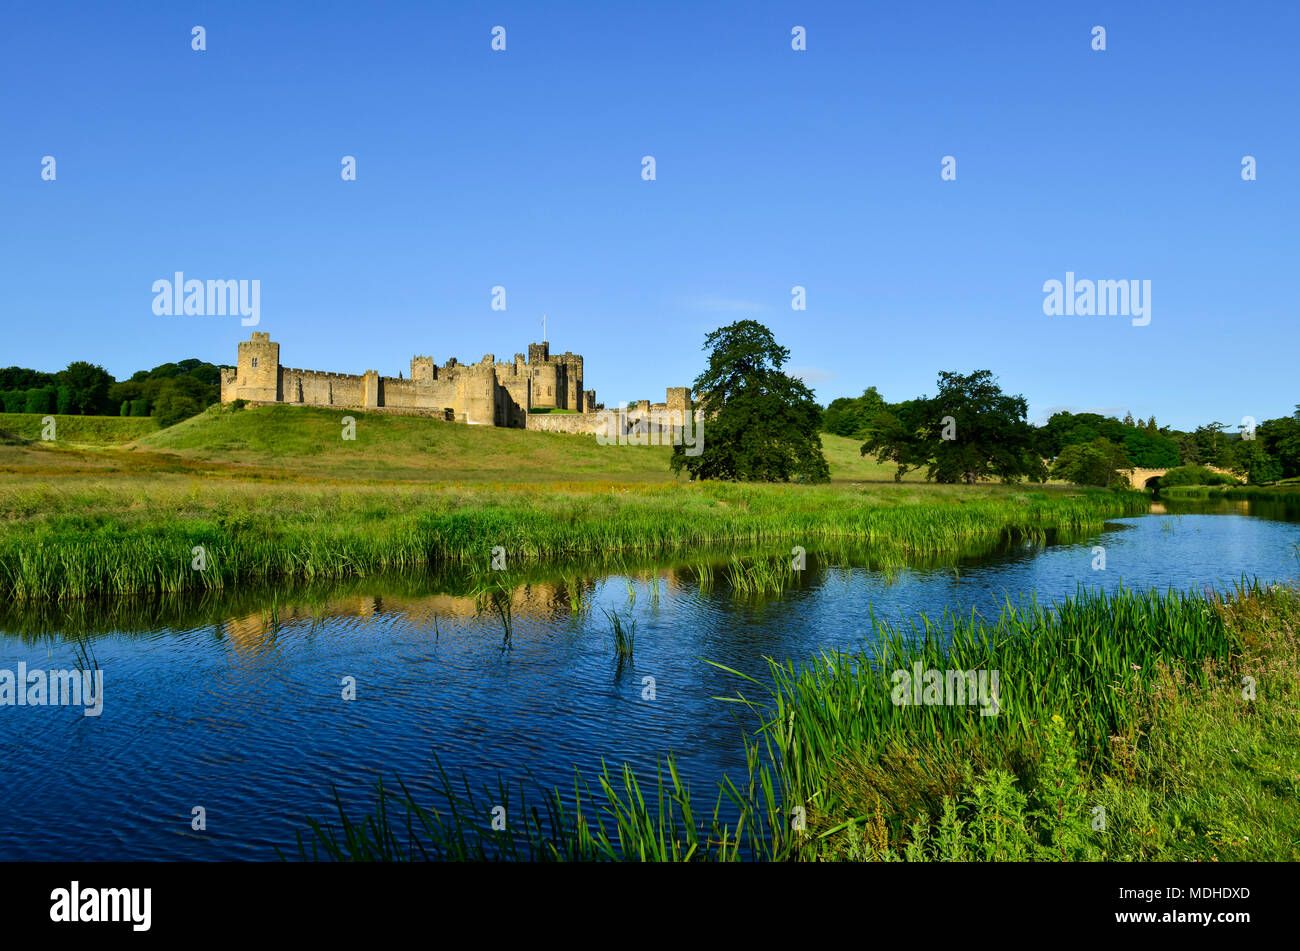 Alnwick Castle and Capability Brown parkland on the River Aln; Alnwick, Northumberland, England Stock Photo